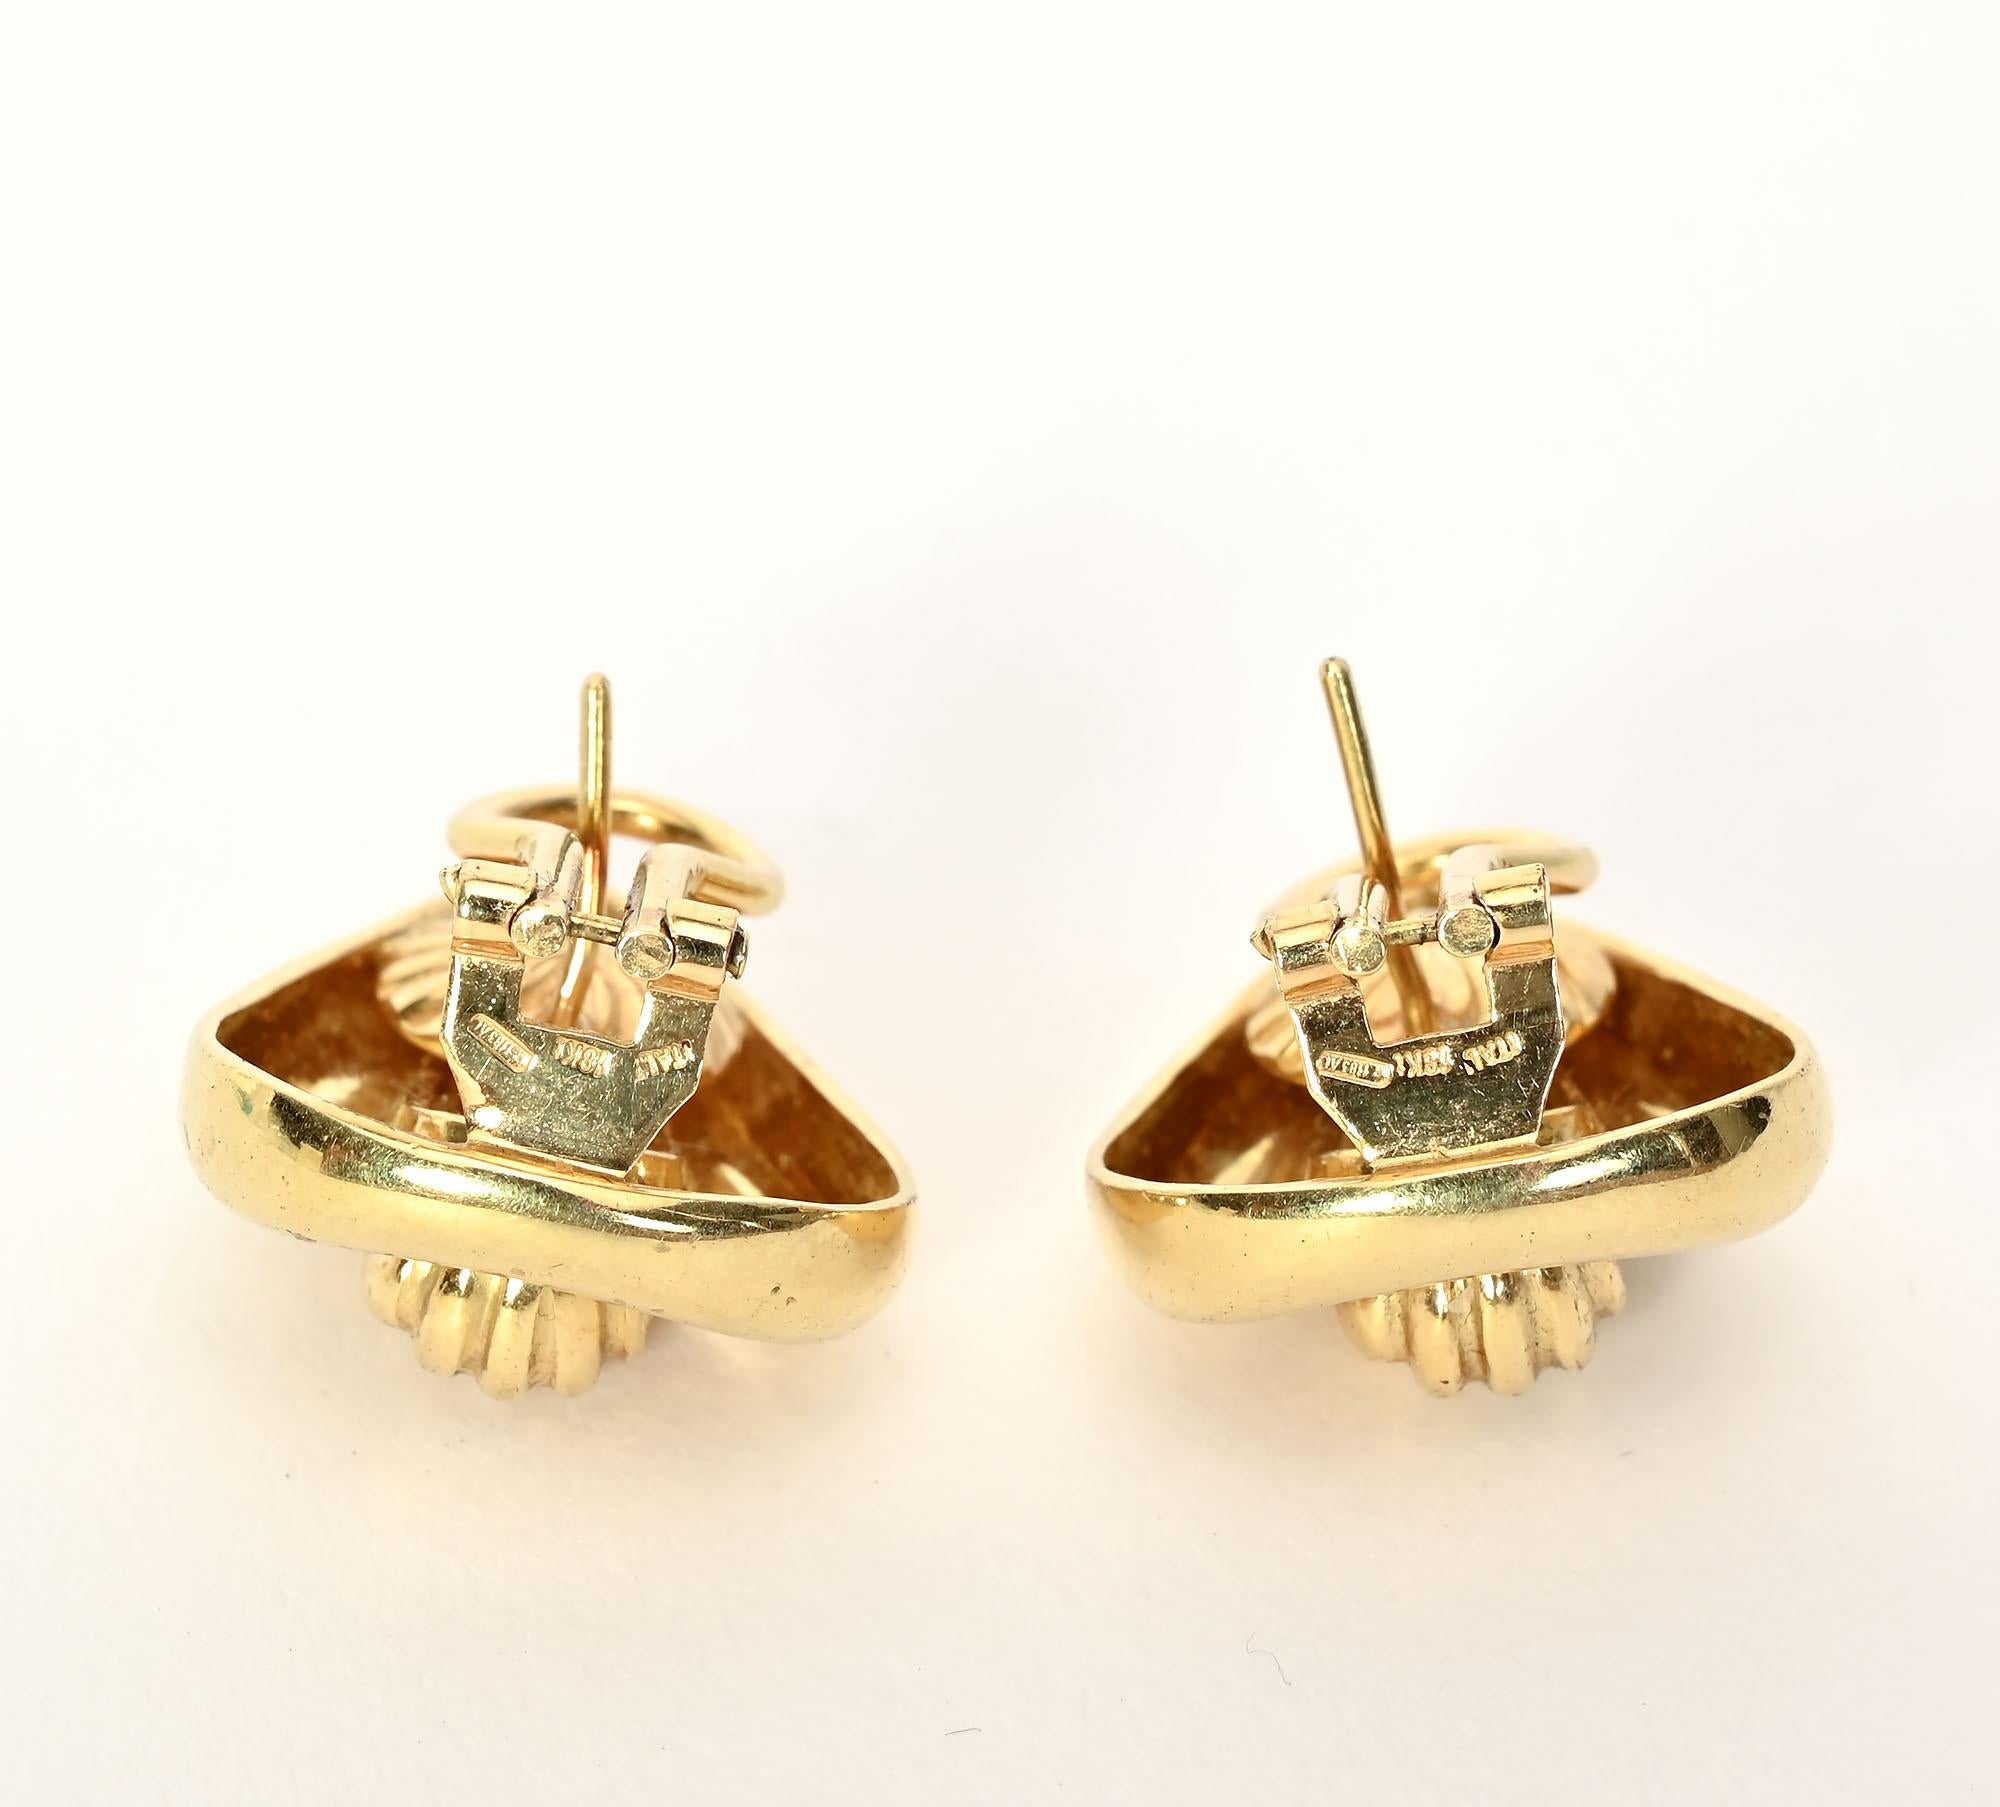 Pear Shaped Gold Earrings In Excellent Condition For Sale In Darnestown, MD